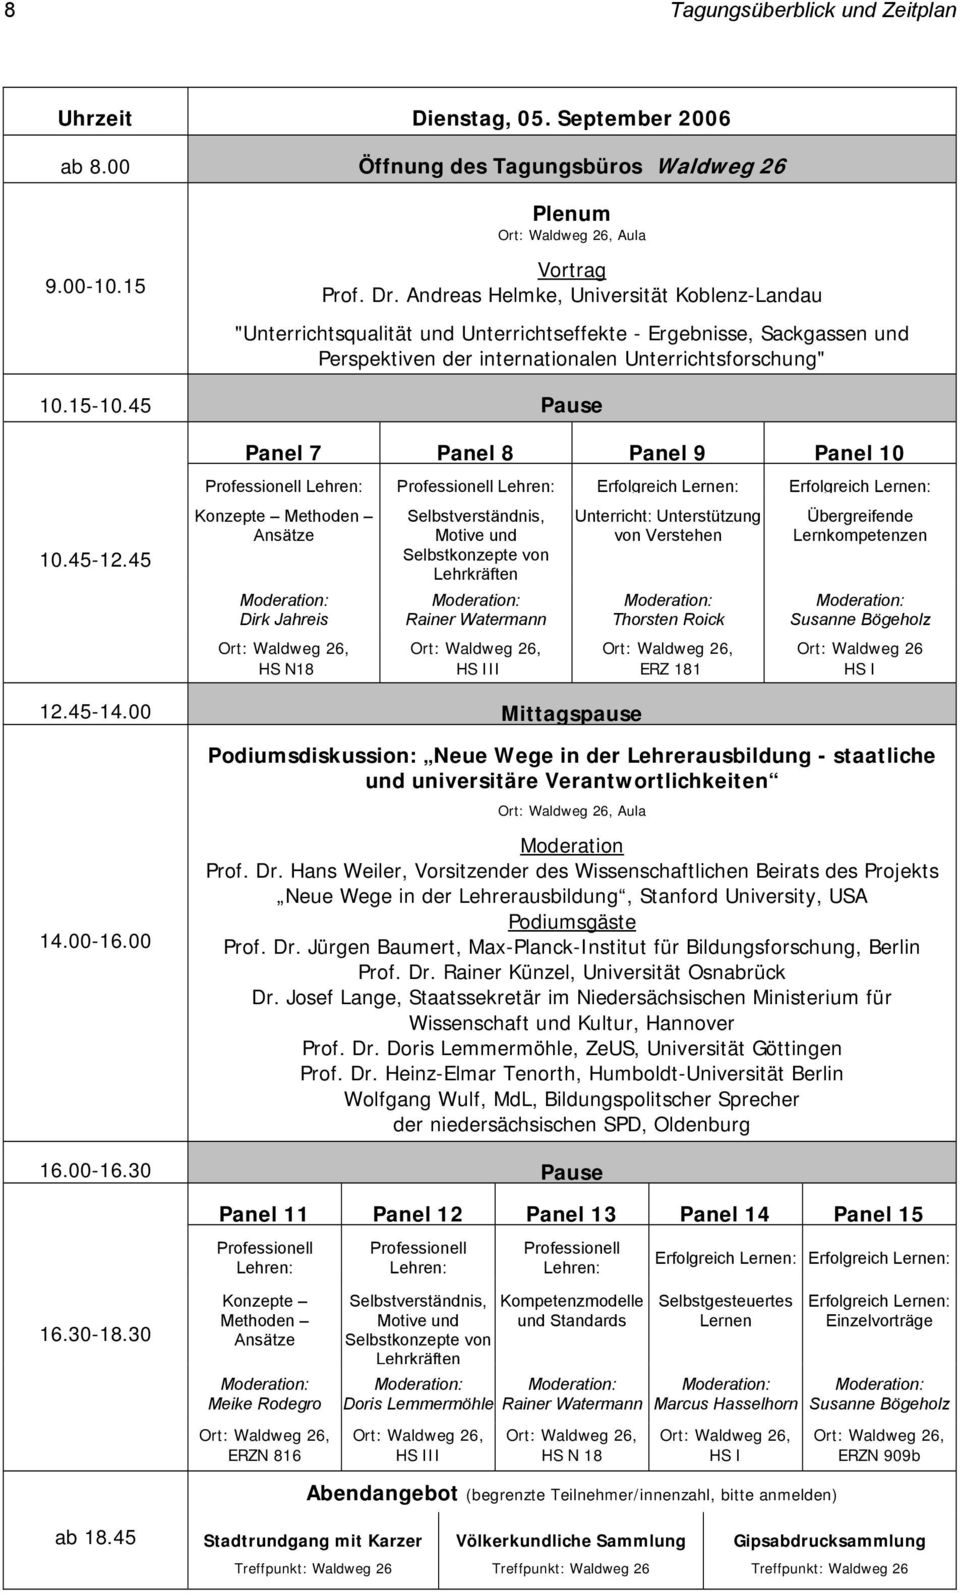 45 Pause Panel 7 Panel 8 Panel 9 Panel 10 Professionell Lehren: Professionell Lehren: Erfolgreich Lernen: Erfolgreich Lernen: 10.45-12.